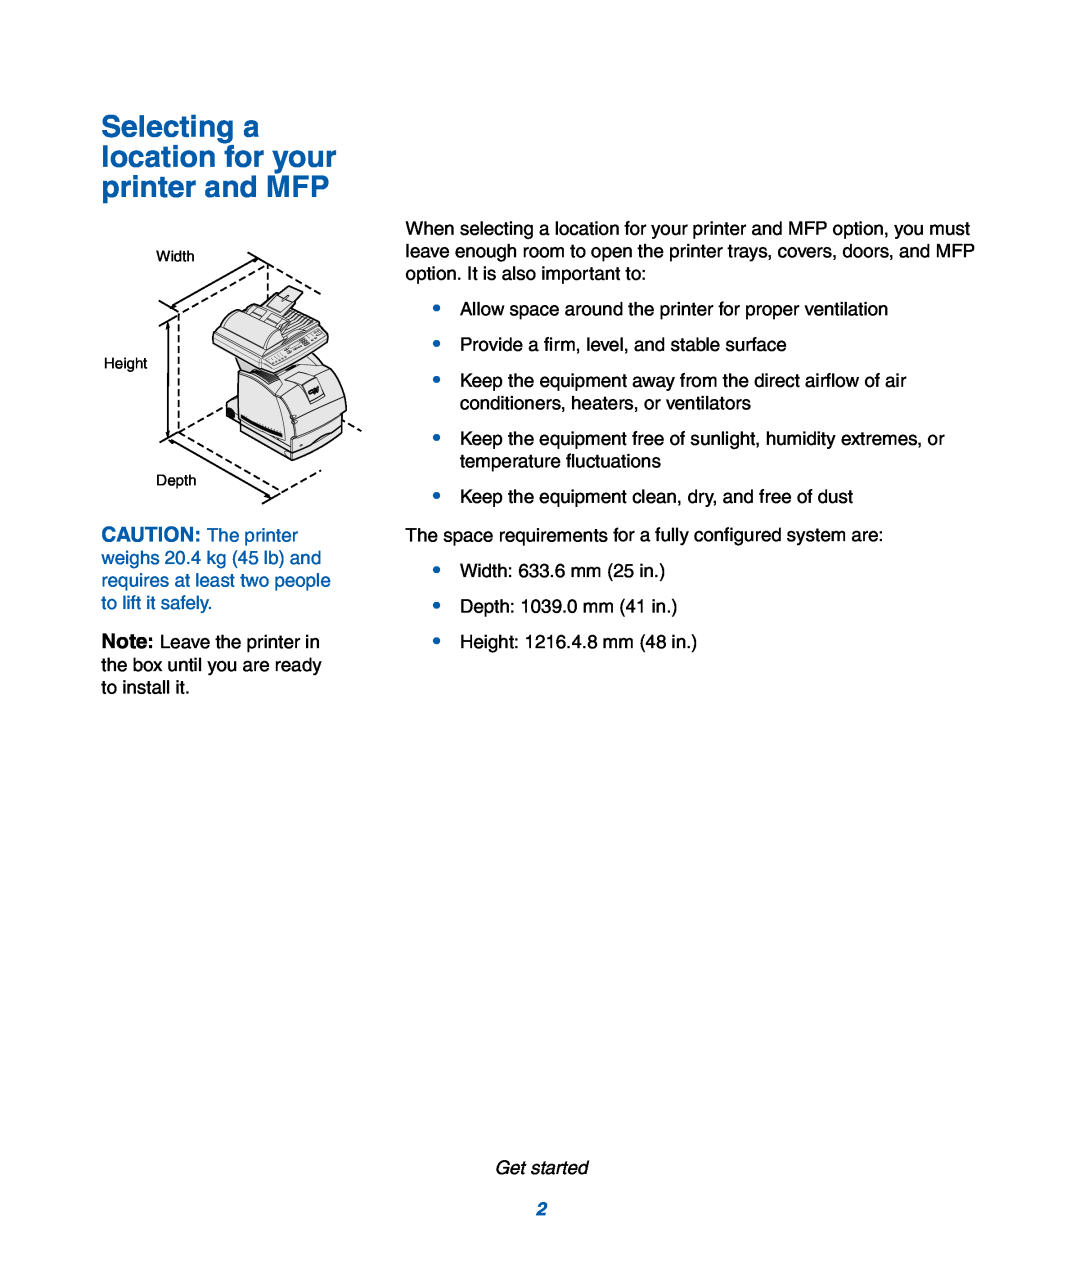 IBM M22 MFP manual Selecting a location for your printer and MFP, Get started 